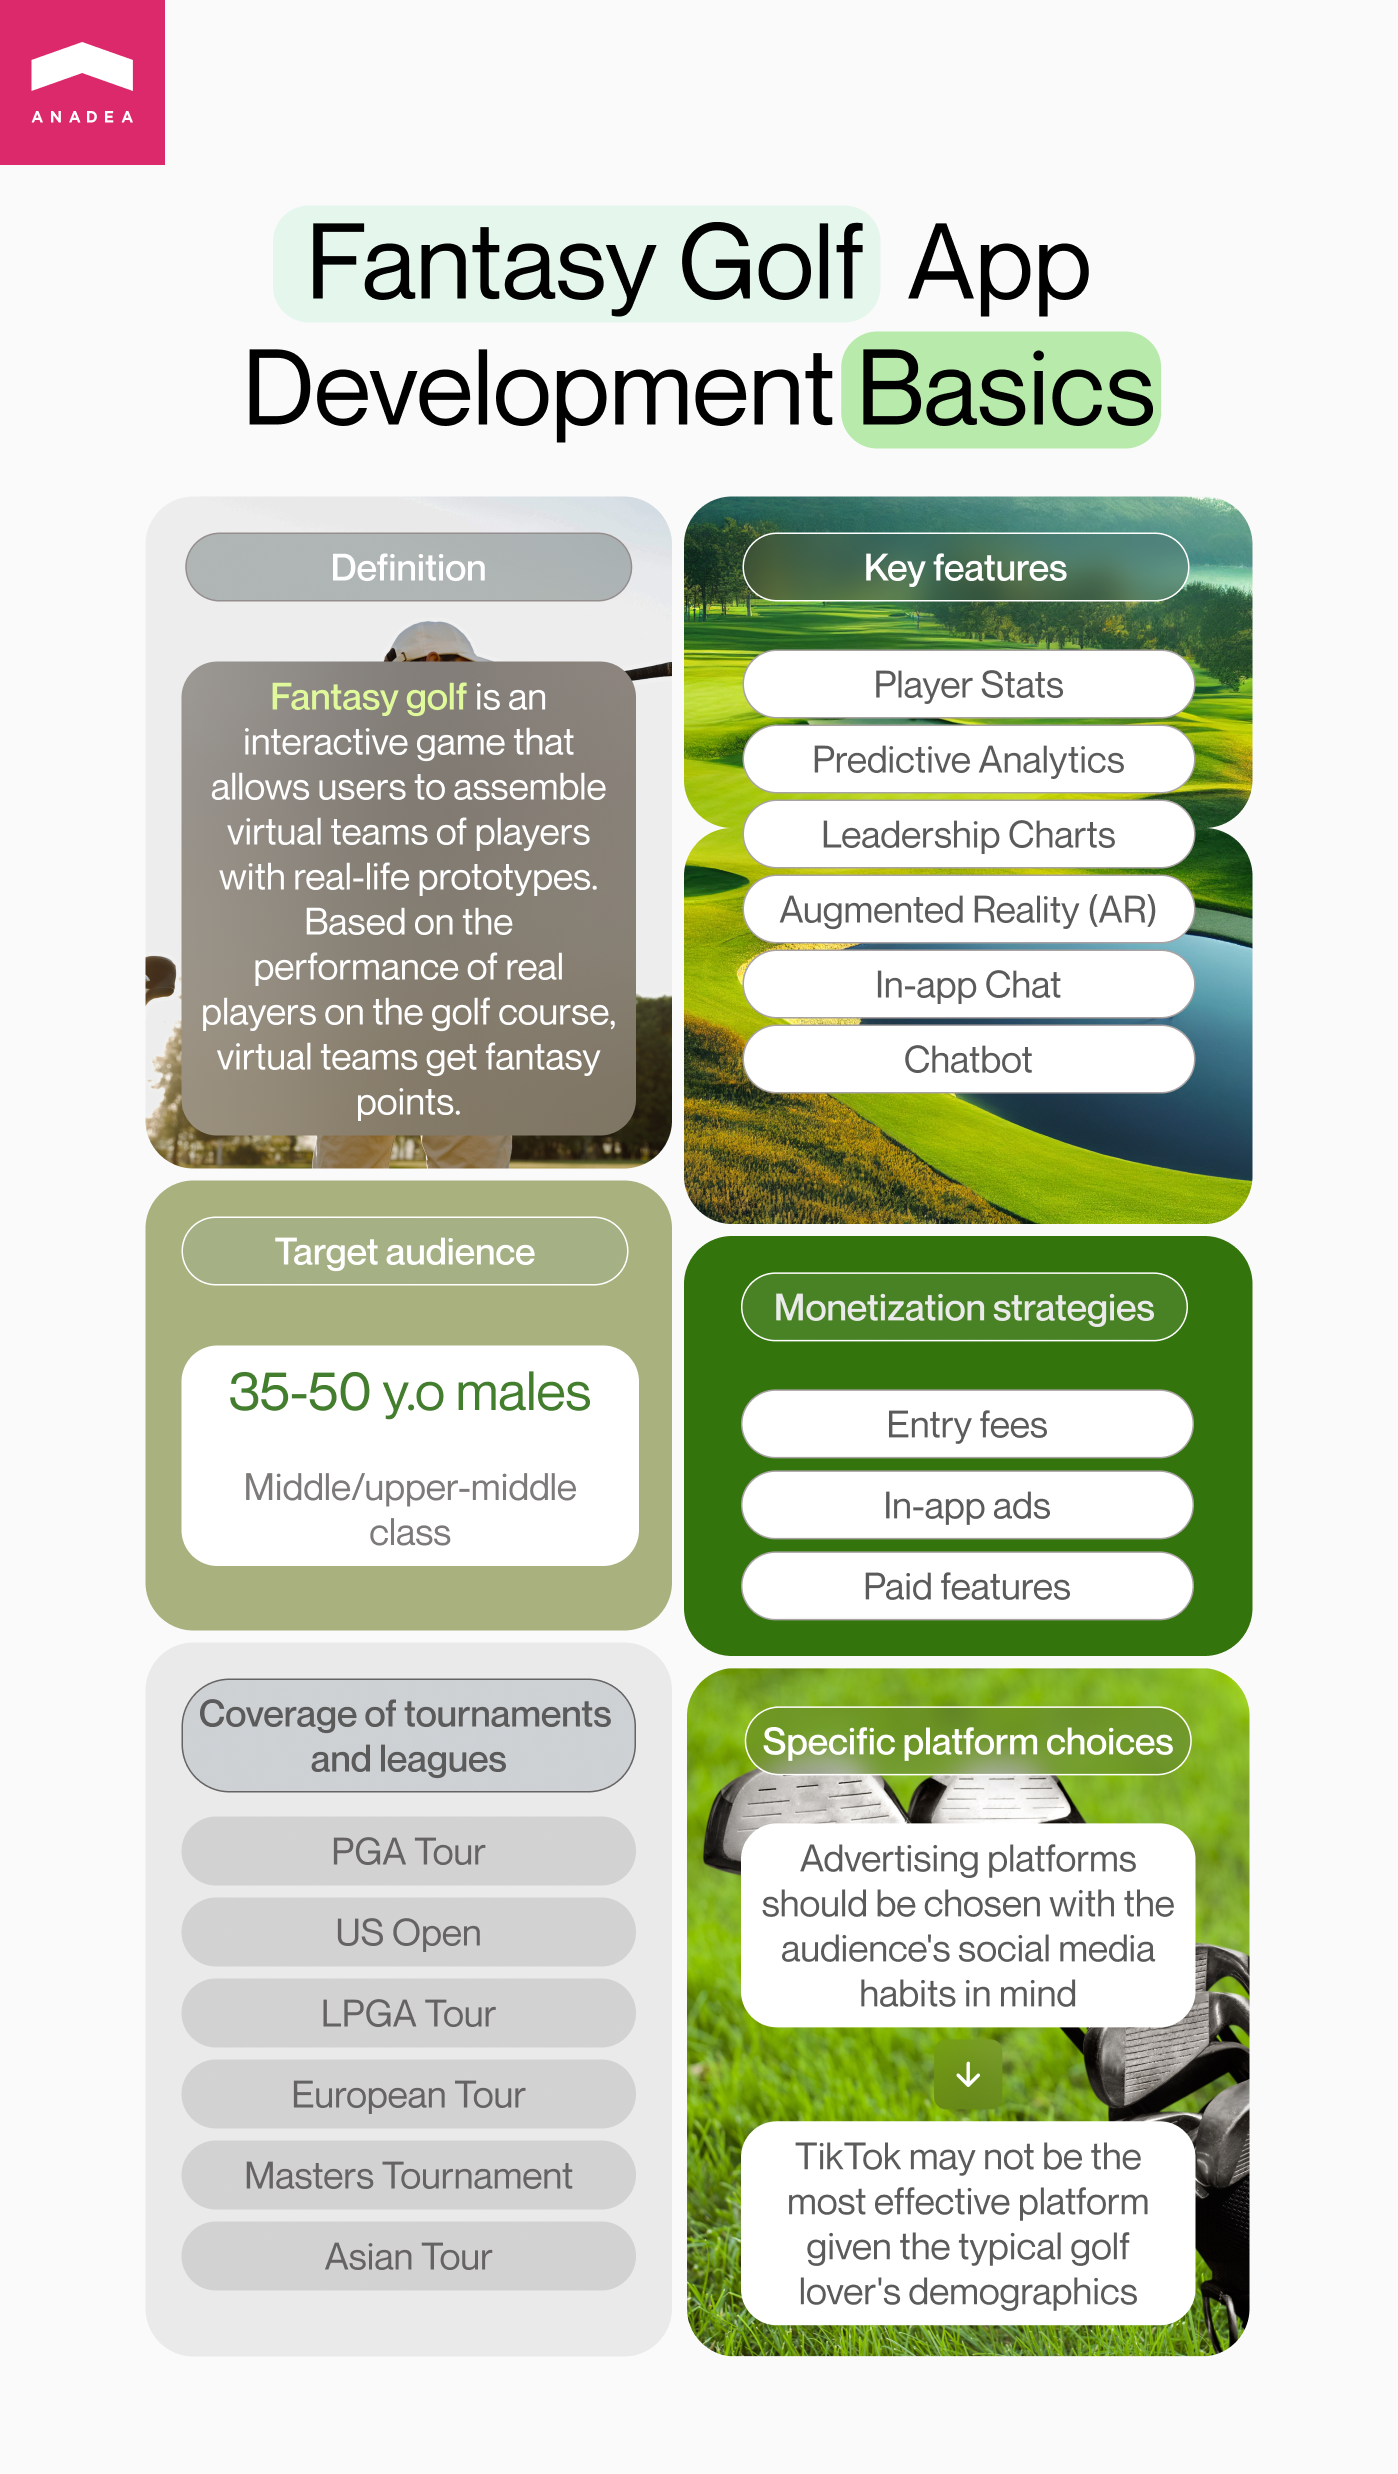 Fantasy golf mobile app infographic - Benefits, Features, Market size